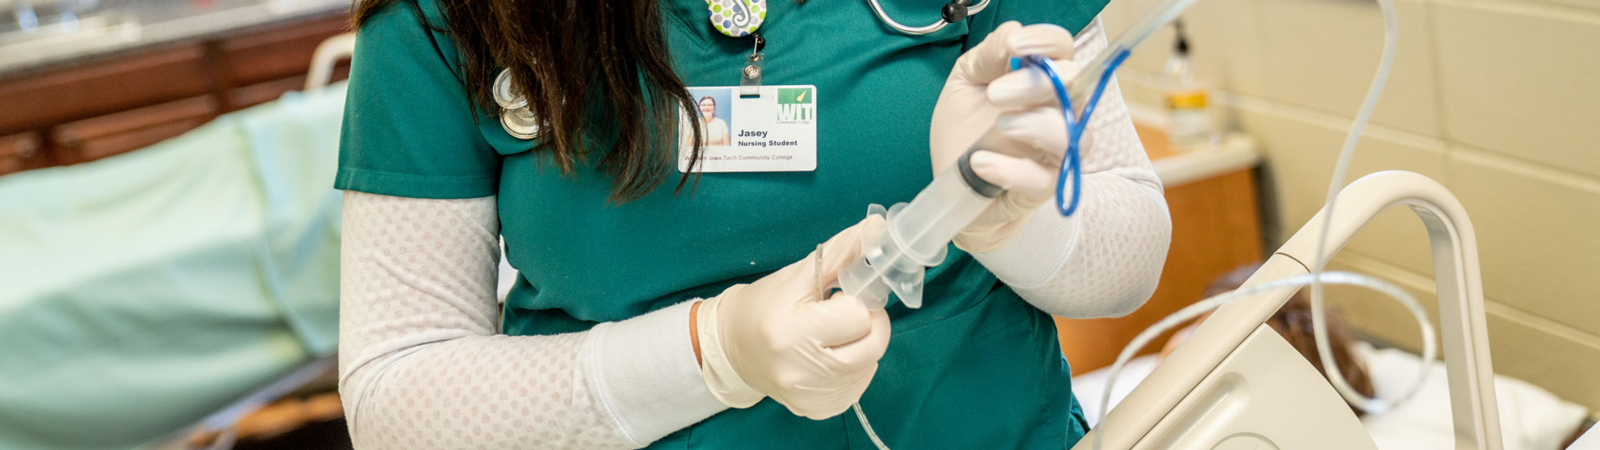 IV Therapy Concepts and Review | Cert